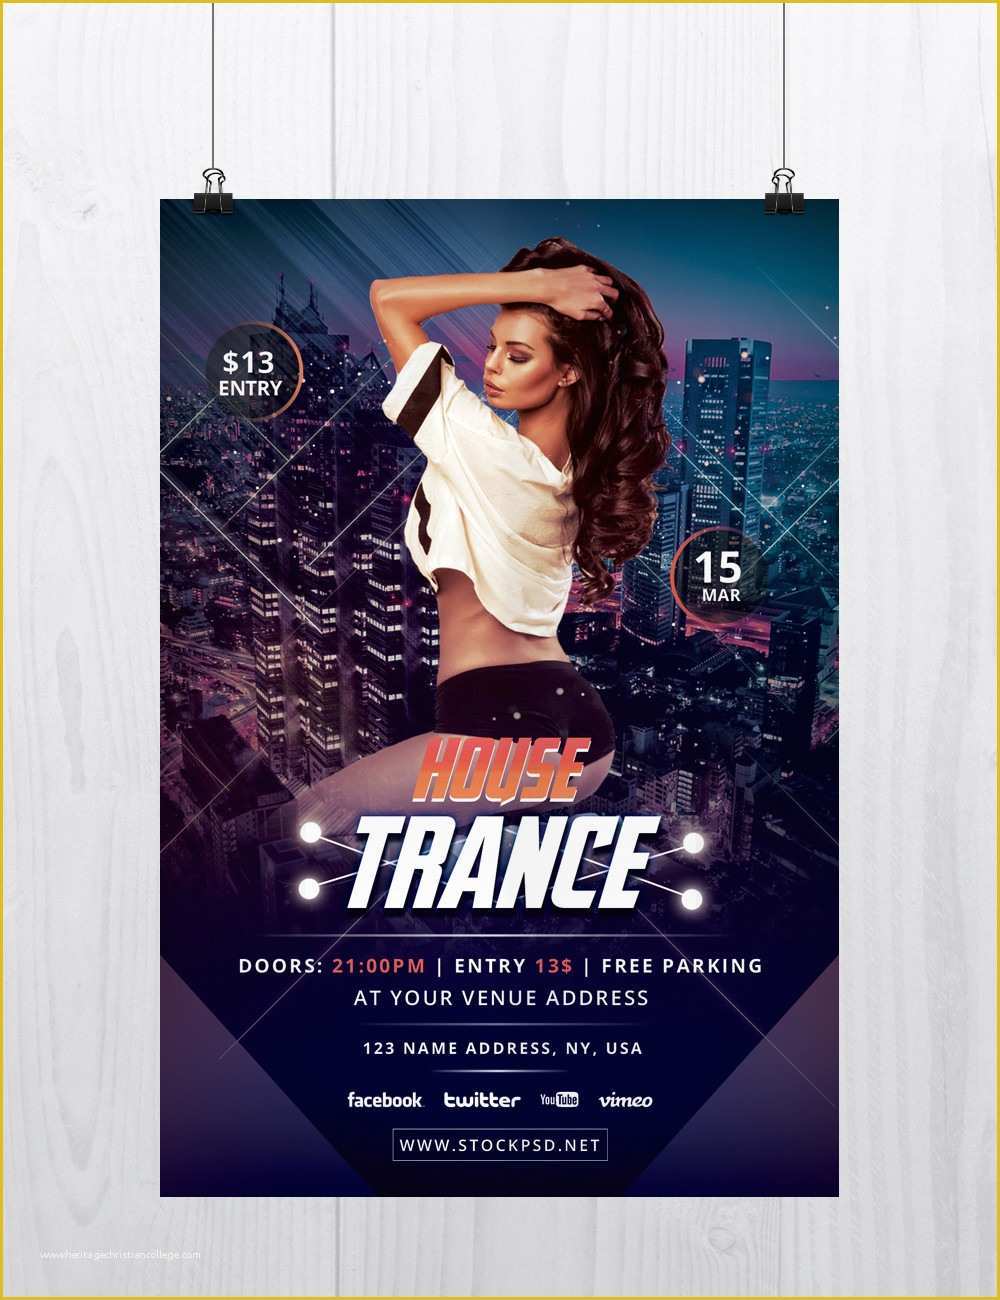 Free Concert Flyer Template Psd Of House Trance Download Free Psd Flyer Template Free Psd